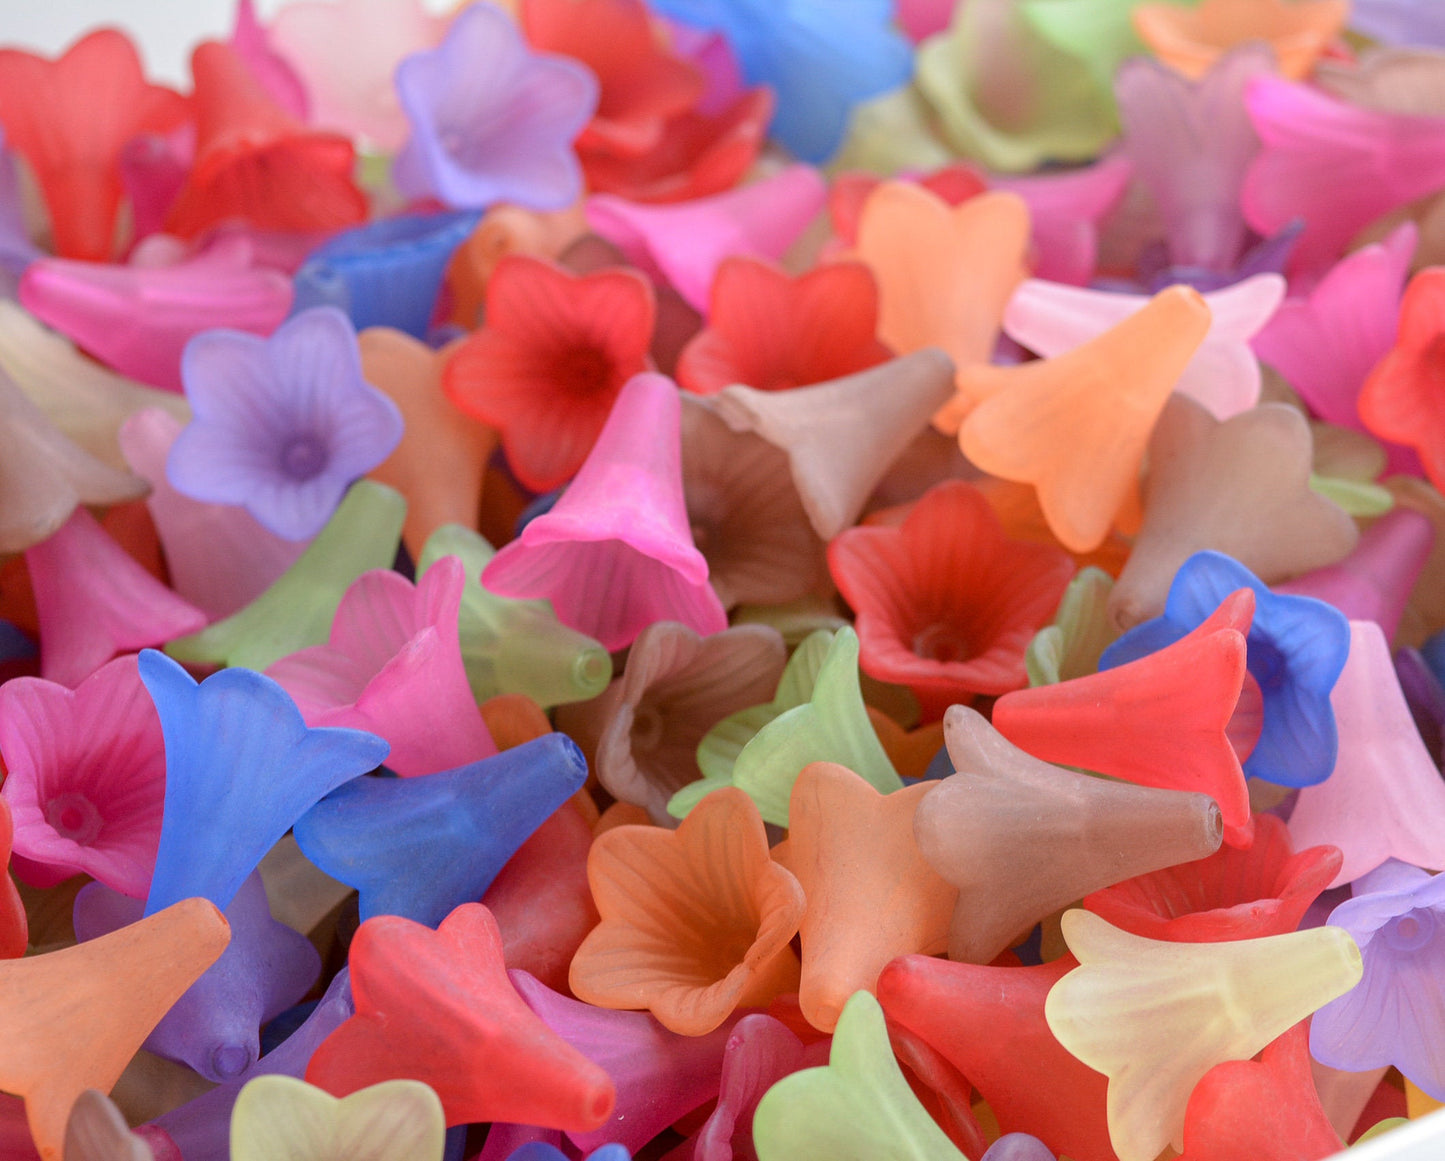 22x22mm Trumpet Flower Beads in Colorful Frosted Acrylic